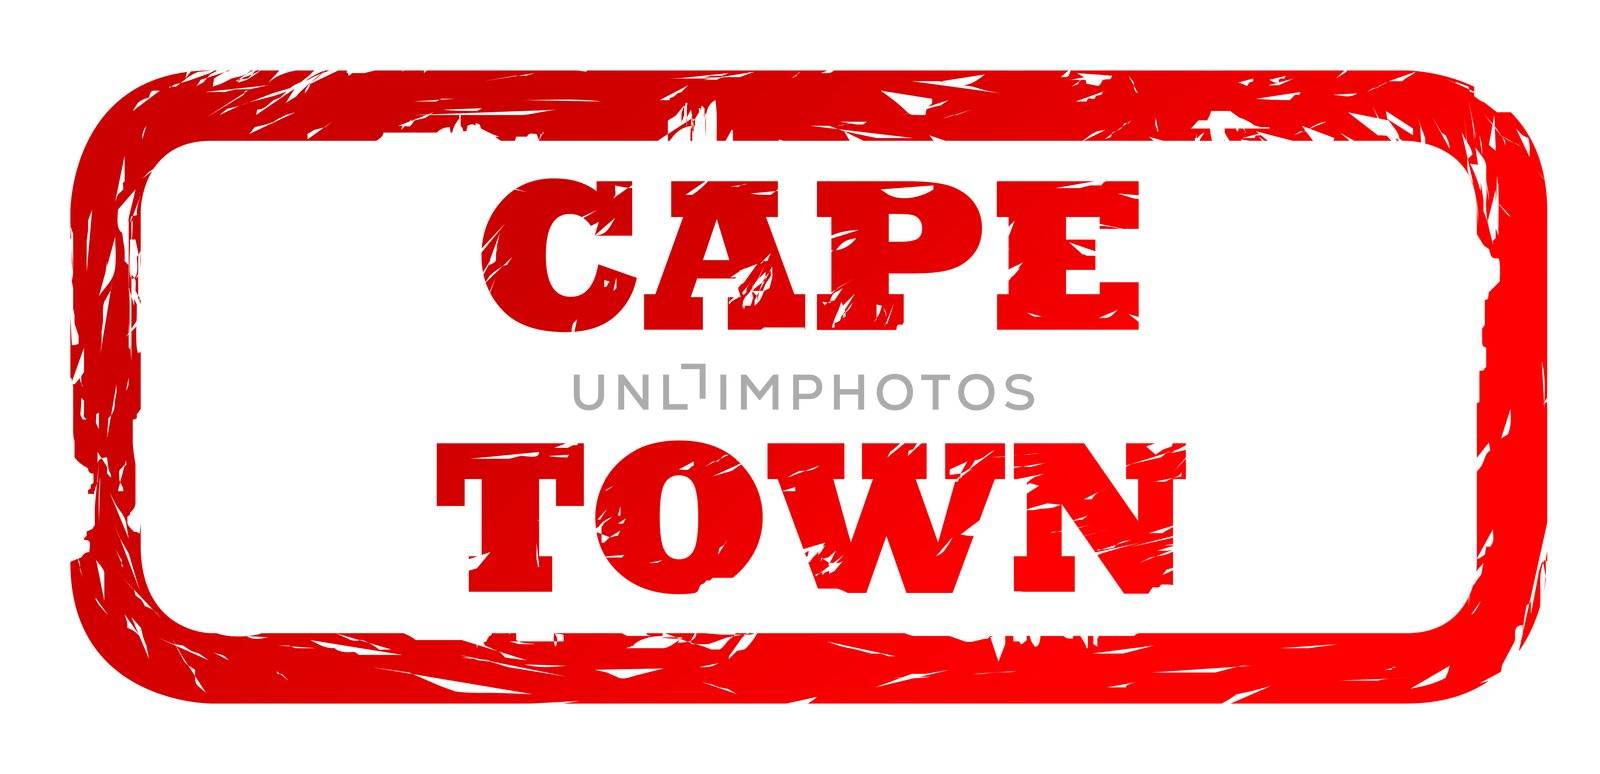 Used red Cape Town South Africa city travel passport stamp, isolated on white background.